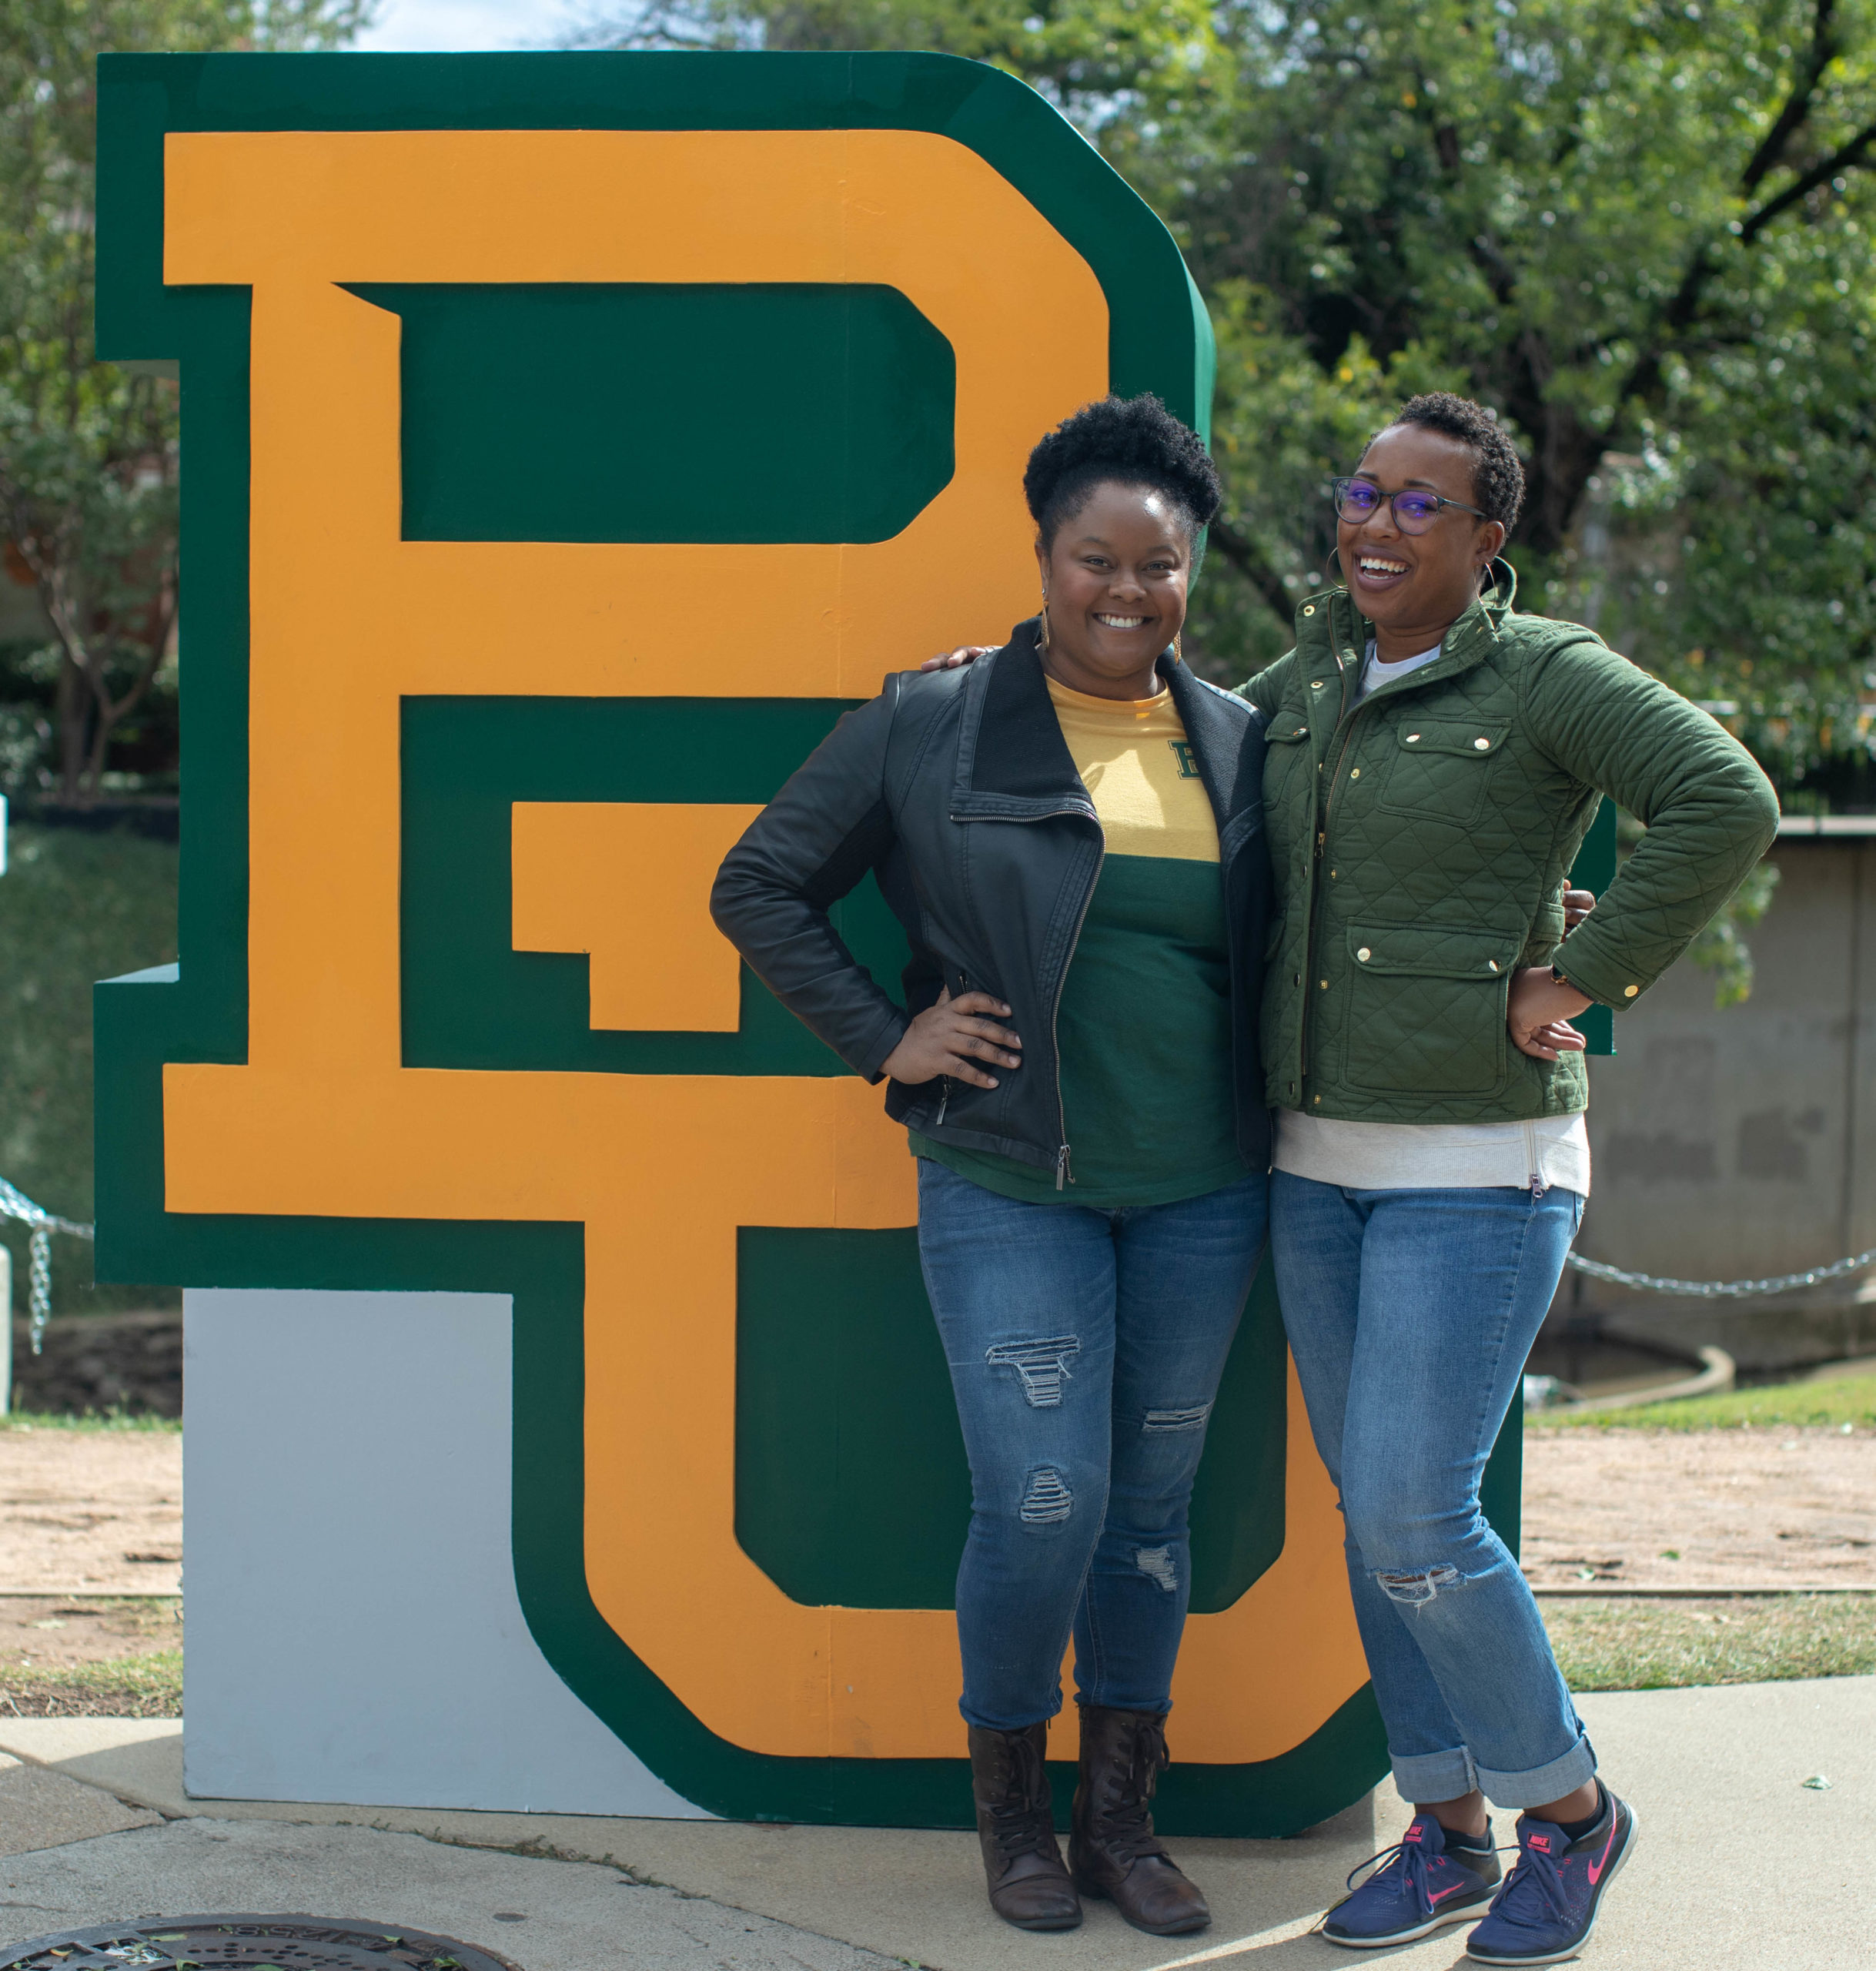 Cene Griffin and Maria Gaston, posing with the interlocking BU sign on campus